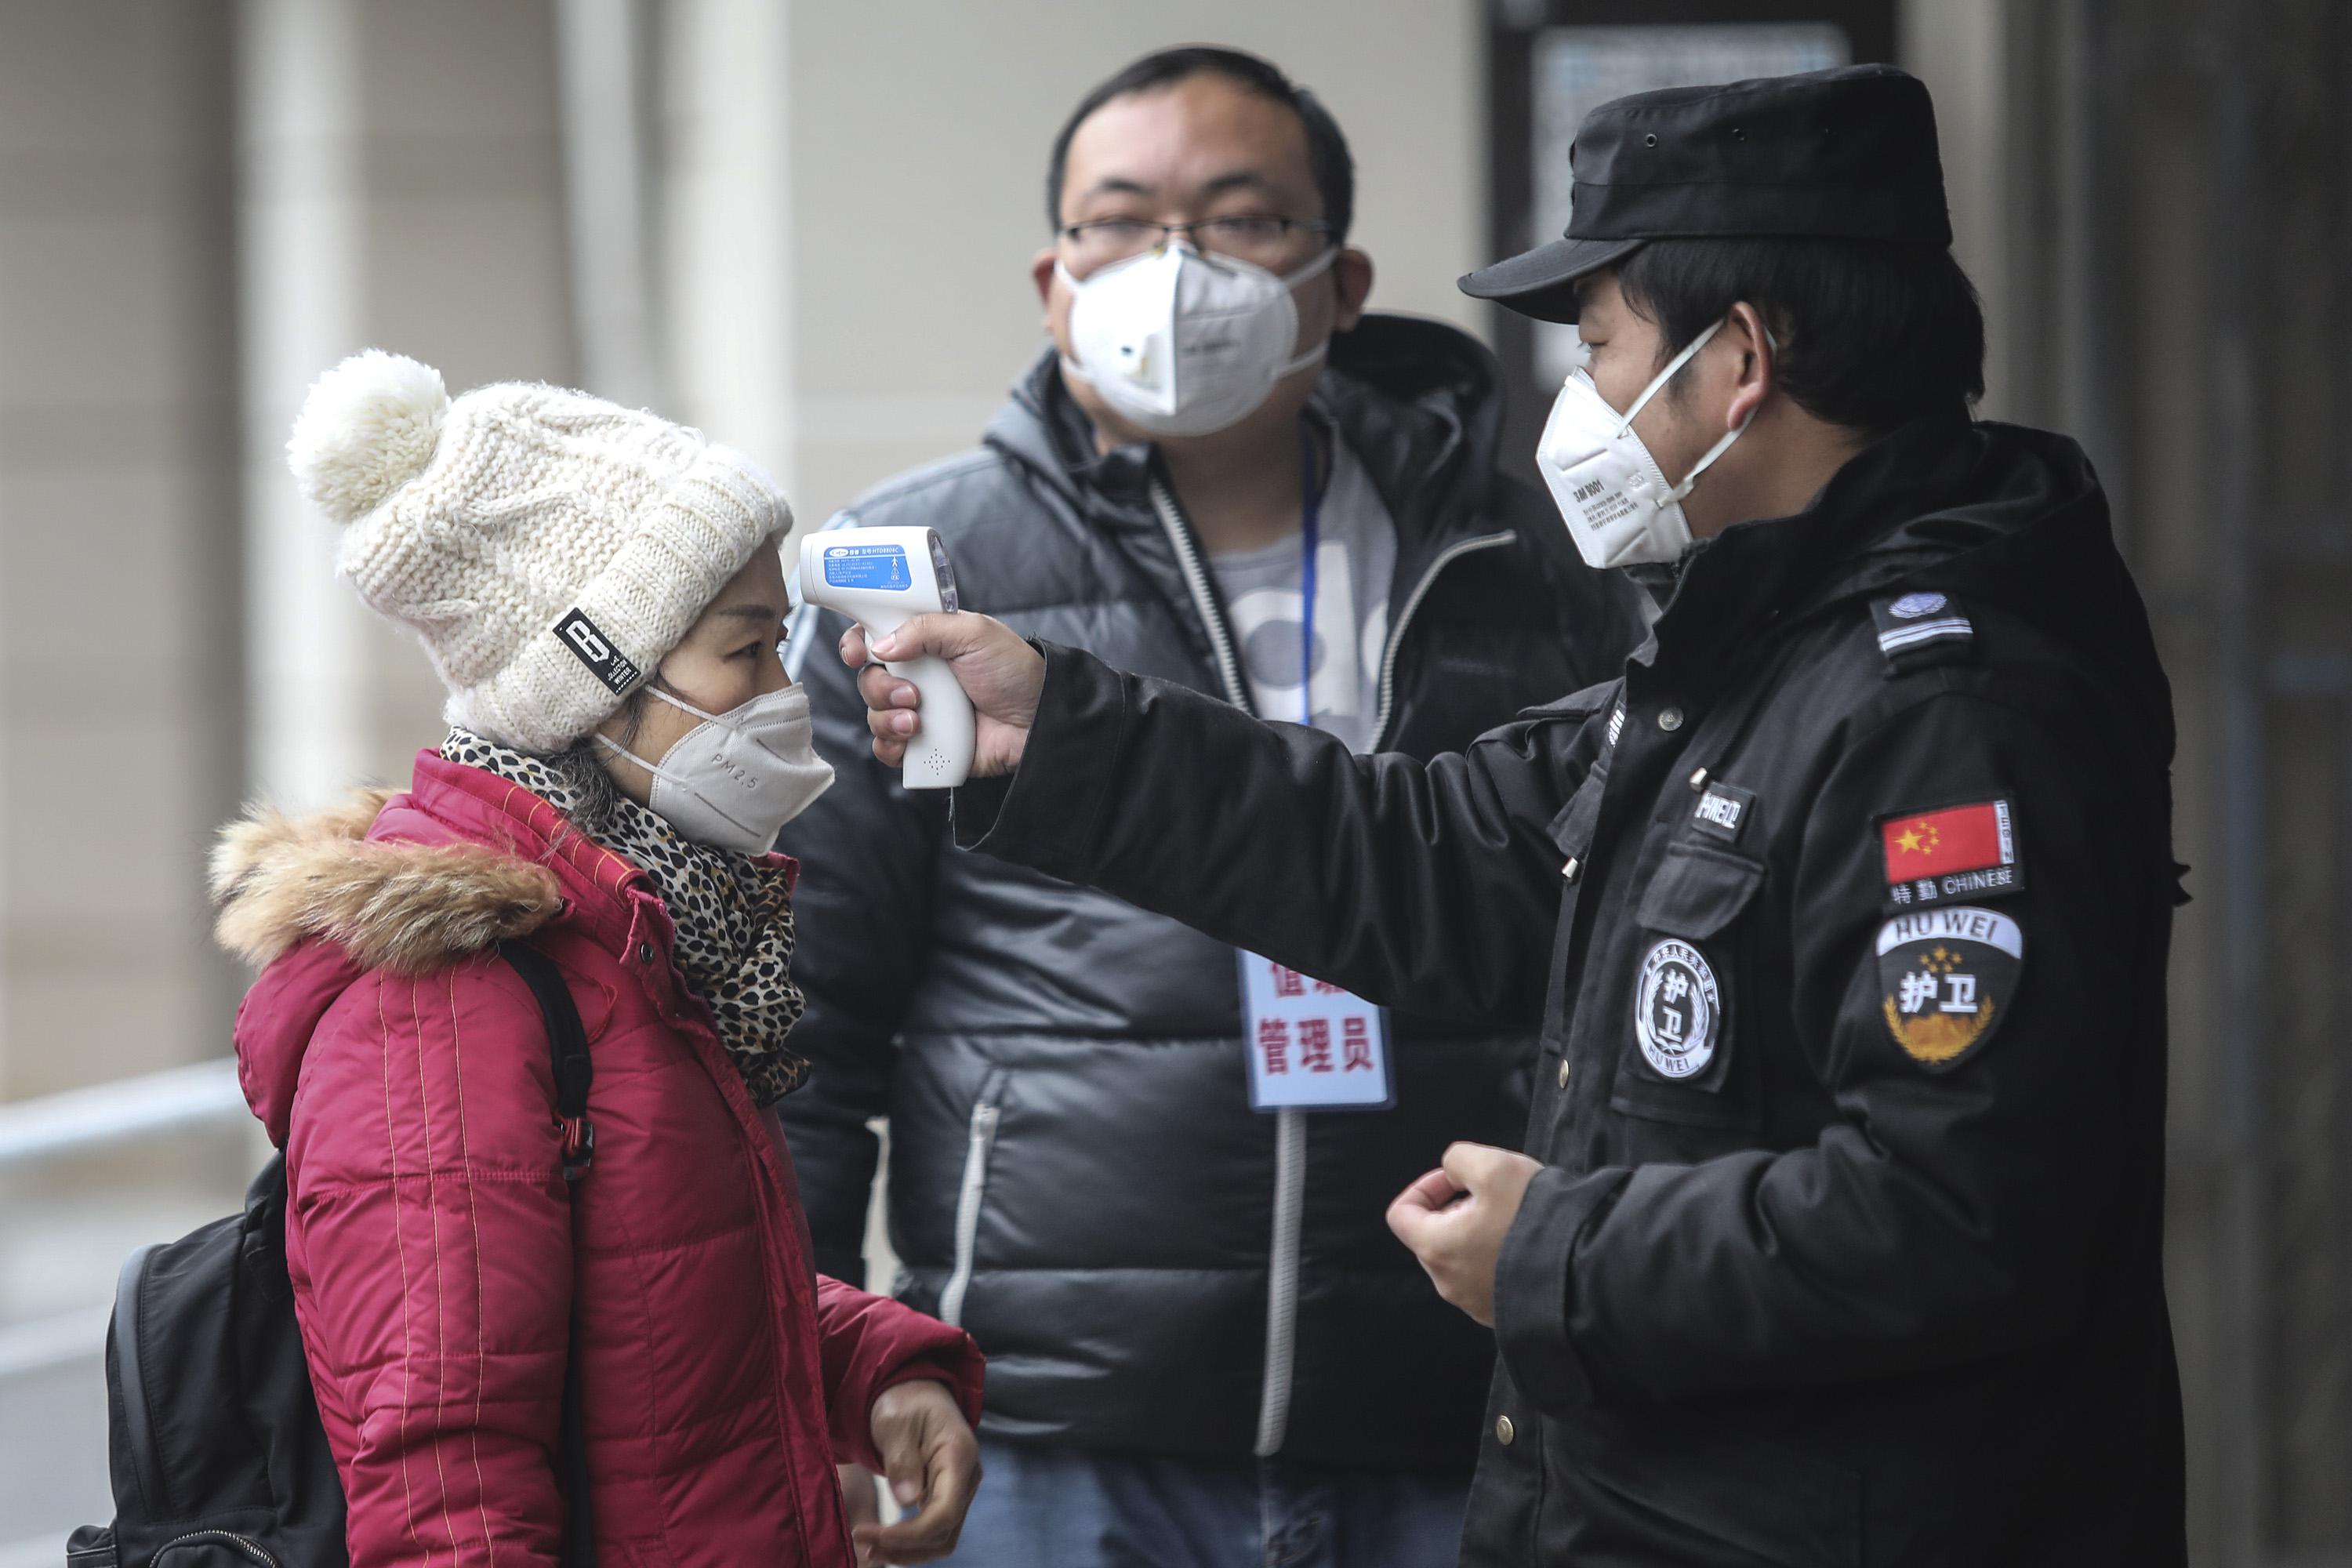 A security personnel on the right checks the temperature of a woman on the left. All 3 people in the photo are wearing flu masks. 